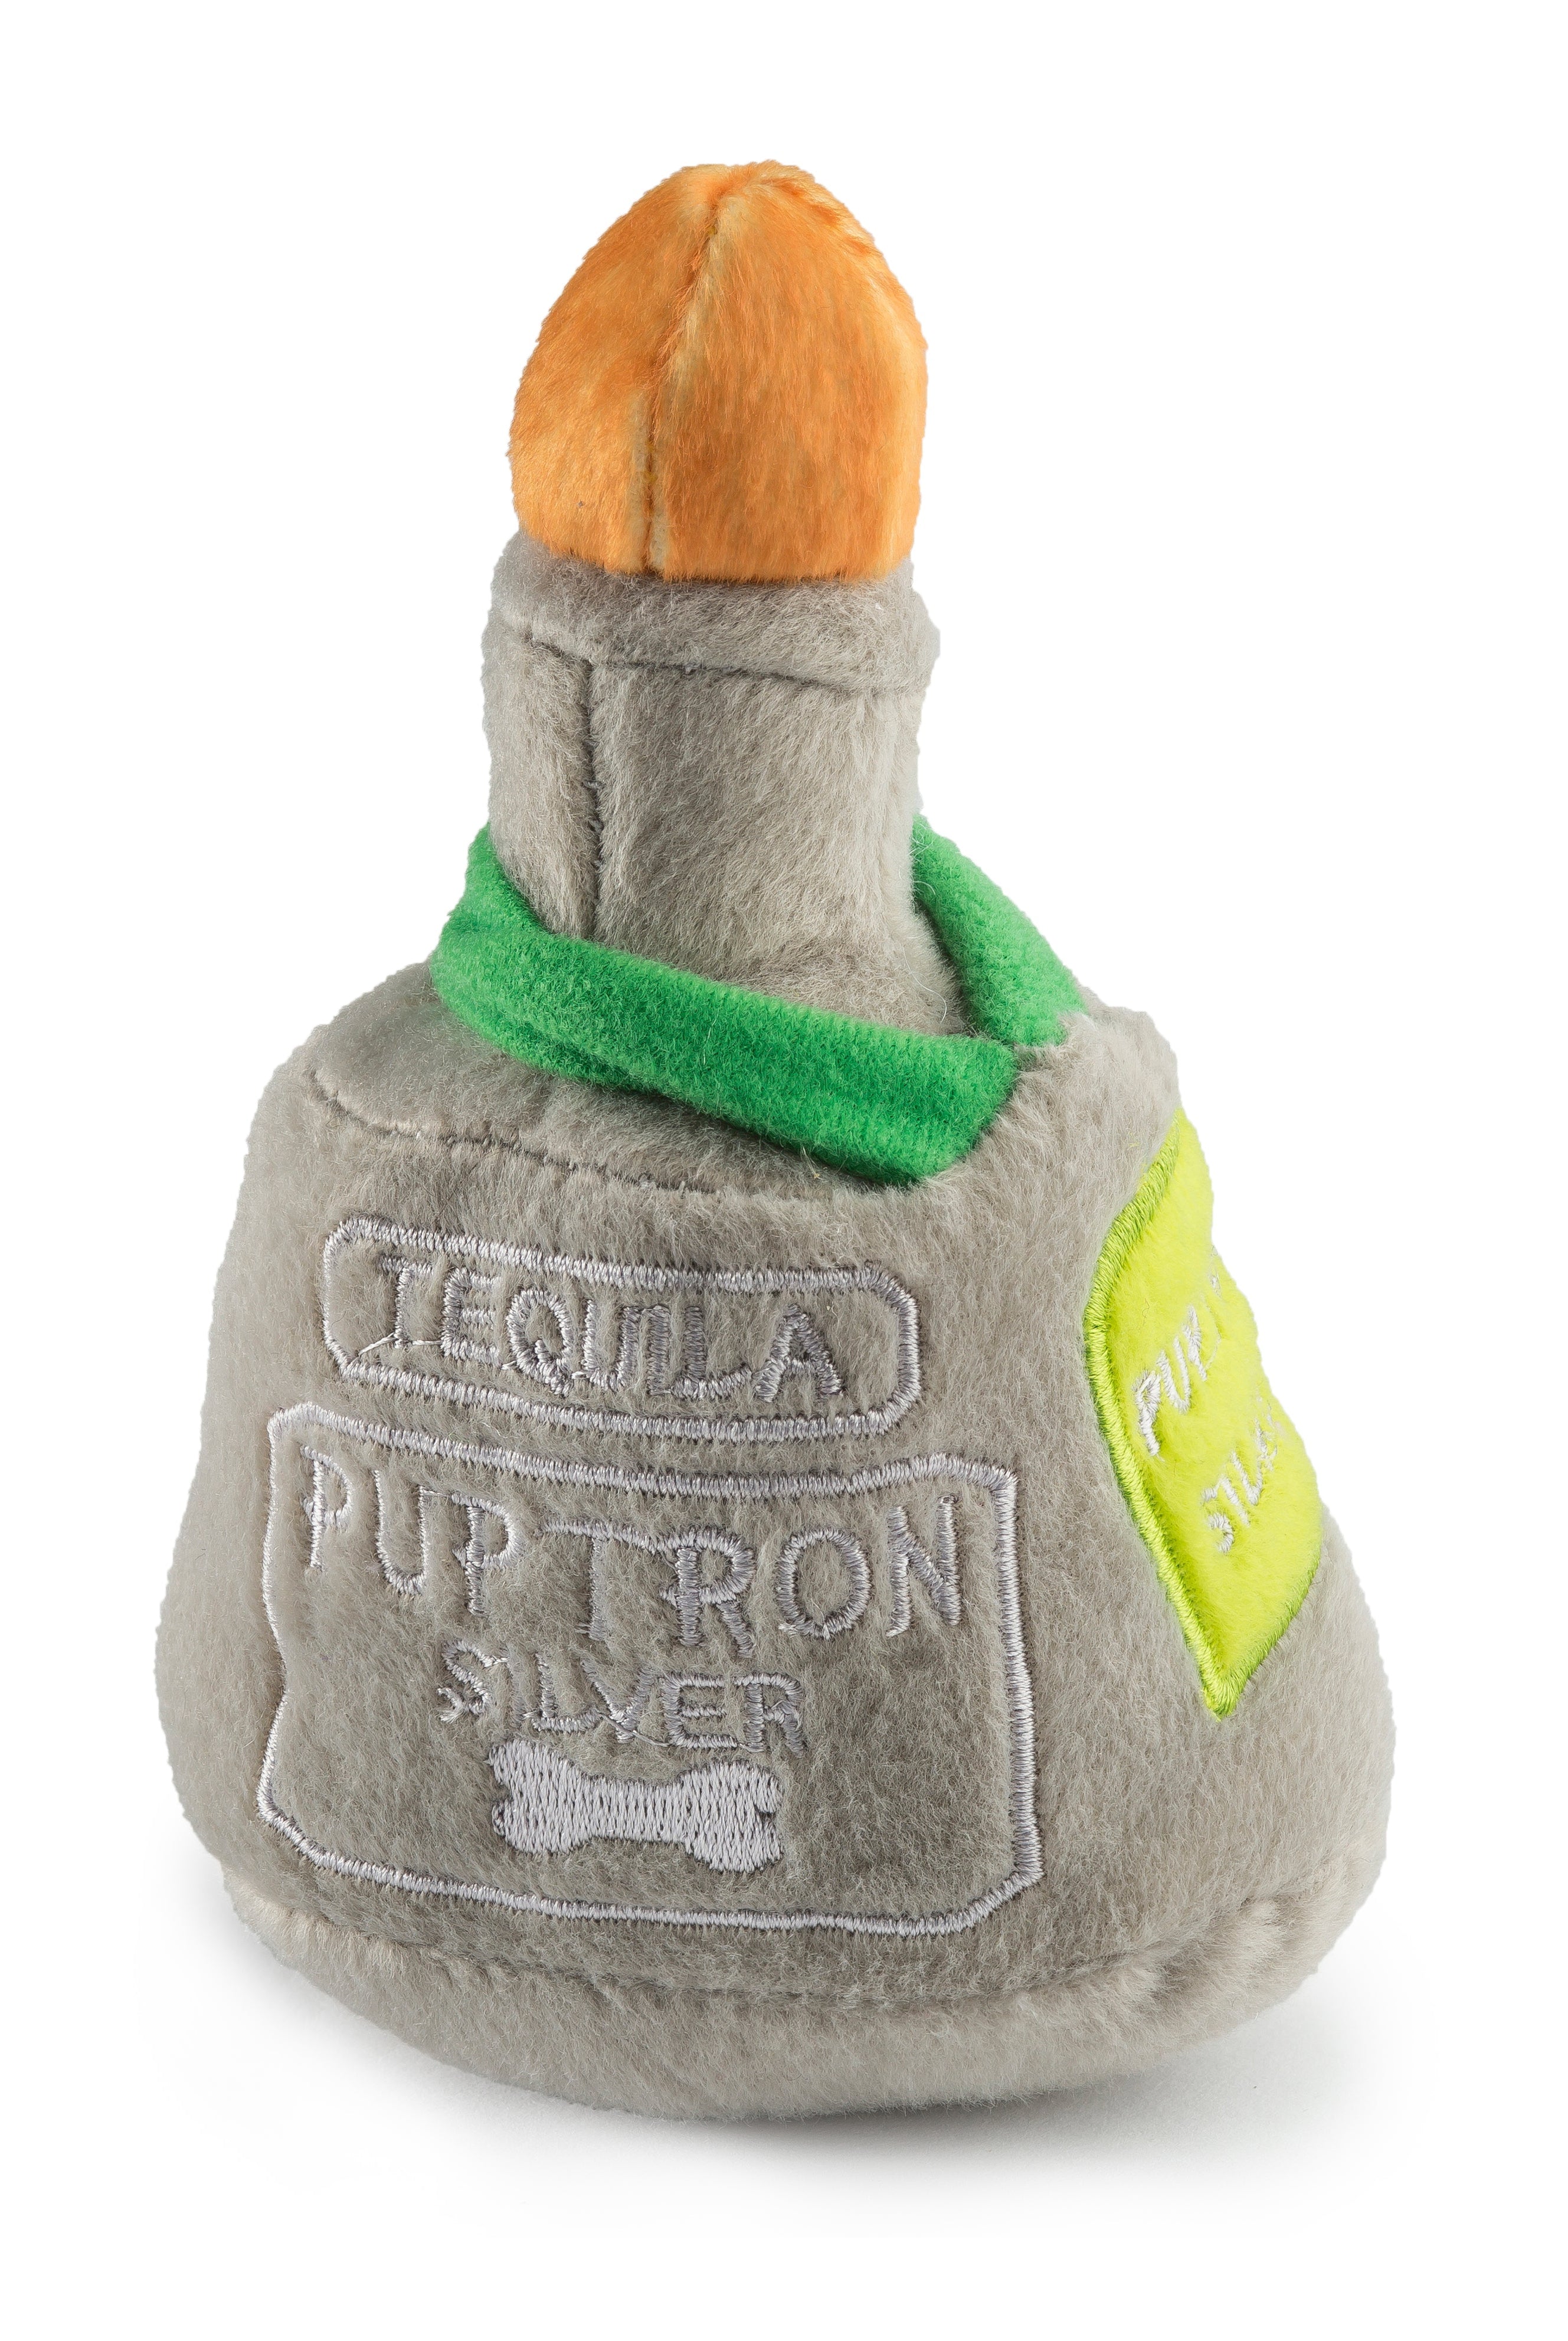 Puptron Tequila Toy-Pet Toys-Vixen Collection, Day Spa and Women's Boutique Located in Seattle, Washington